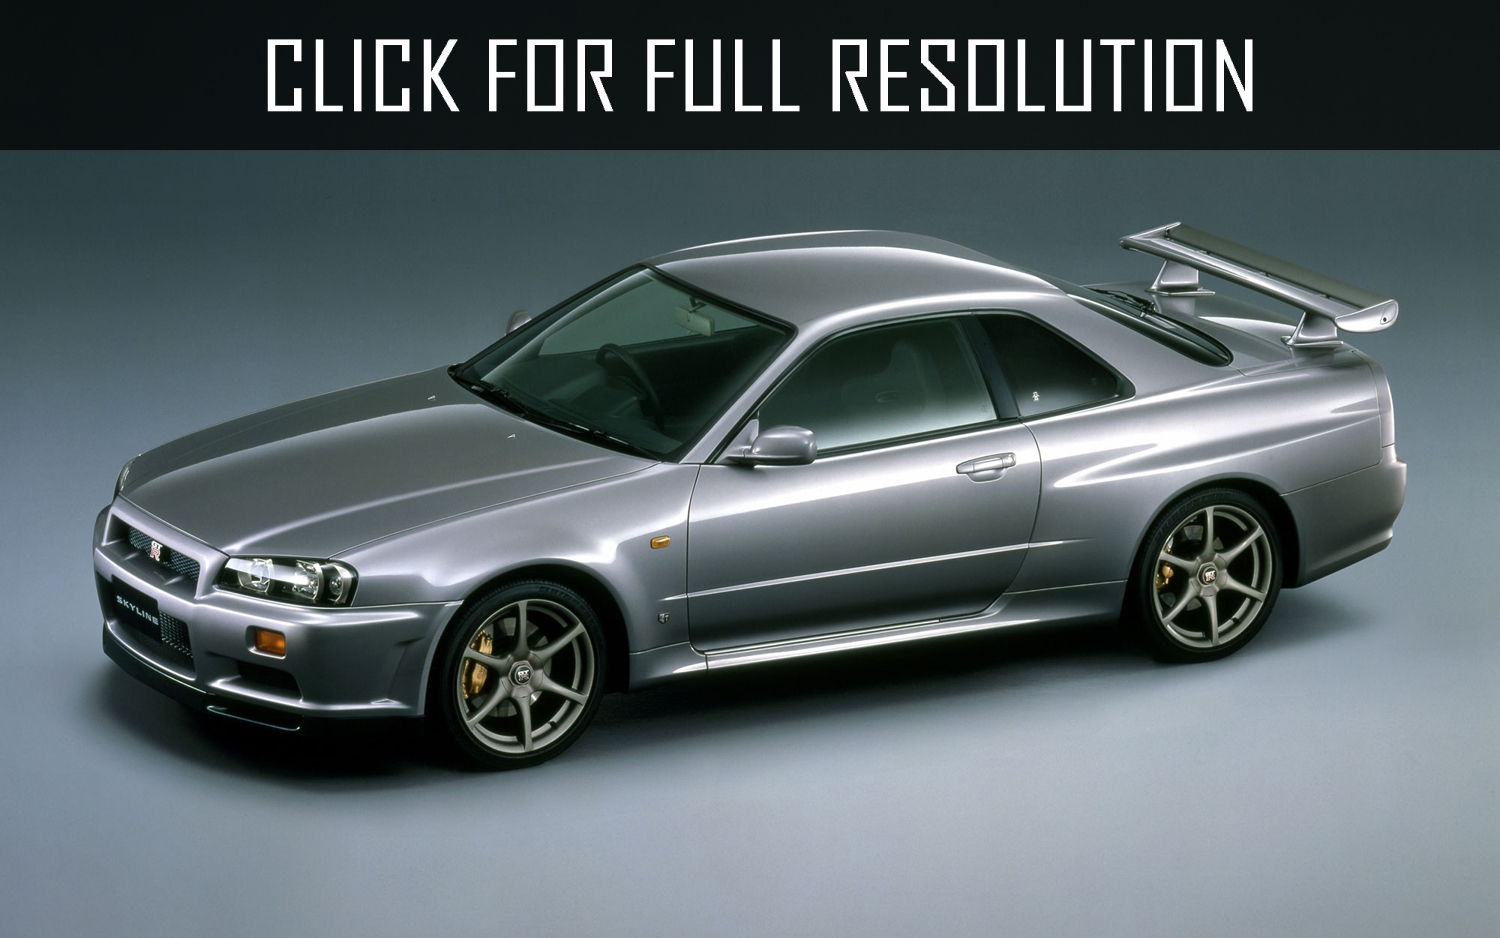 1989 Nissan Skyline R32 Best Image Gallery 1 20 Share And